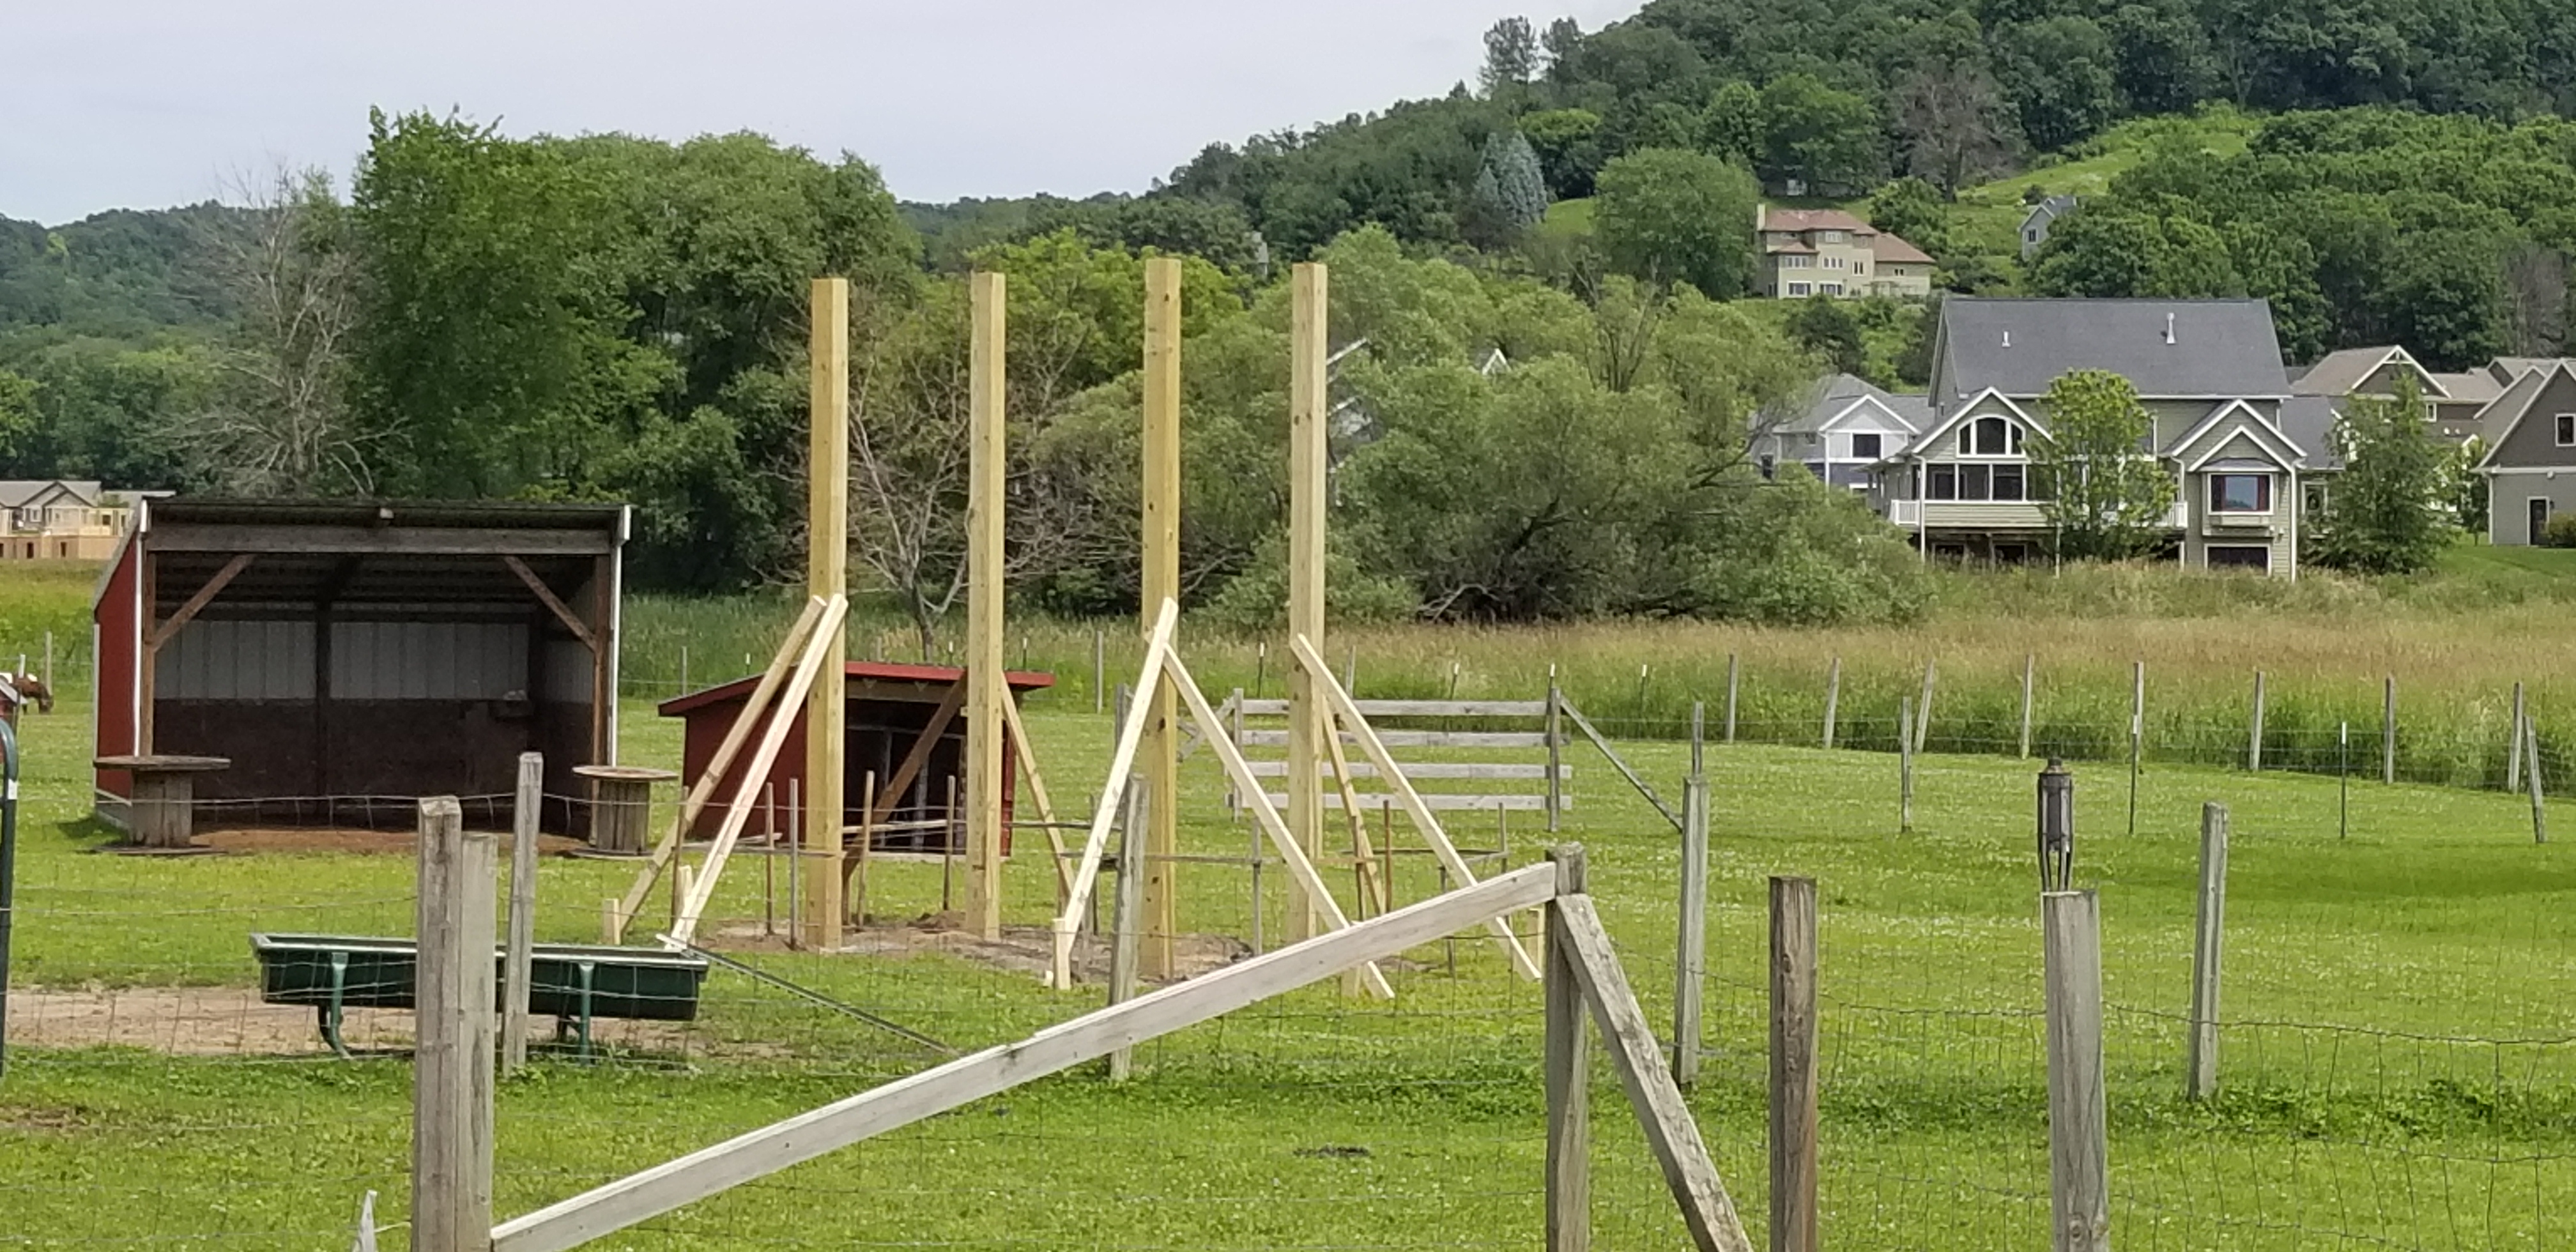 goat playground under construction.  Start with the highest feature